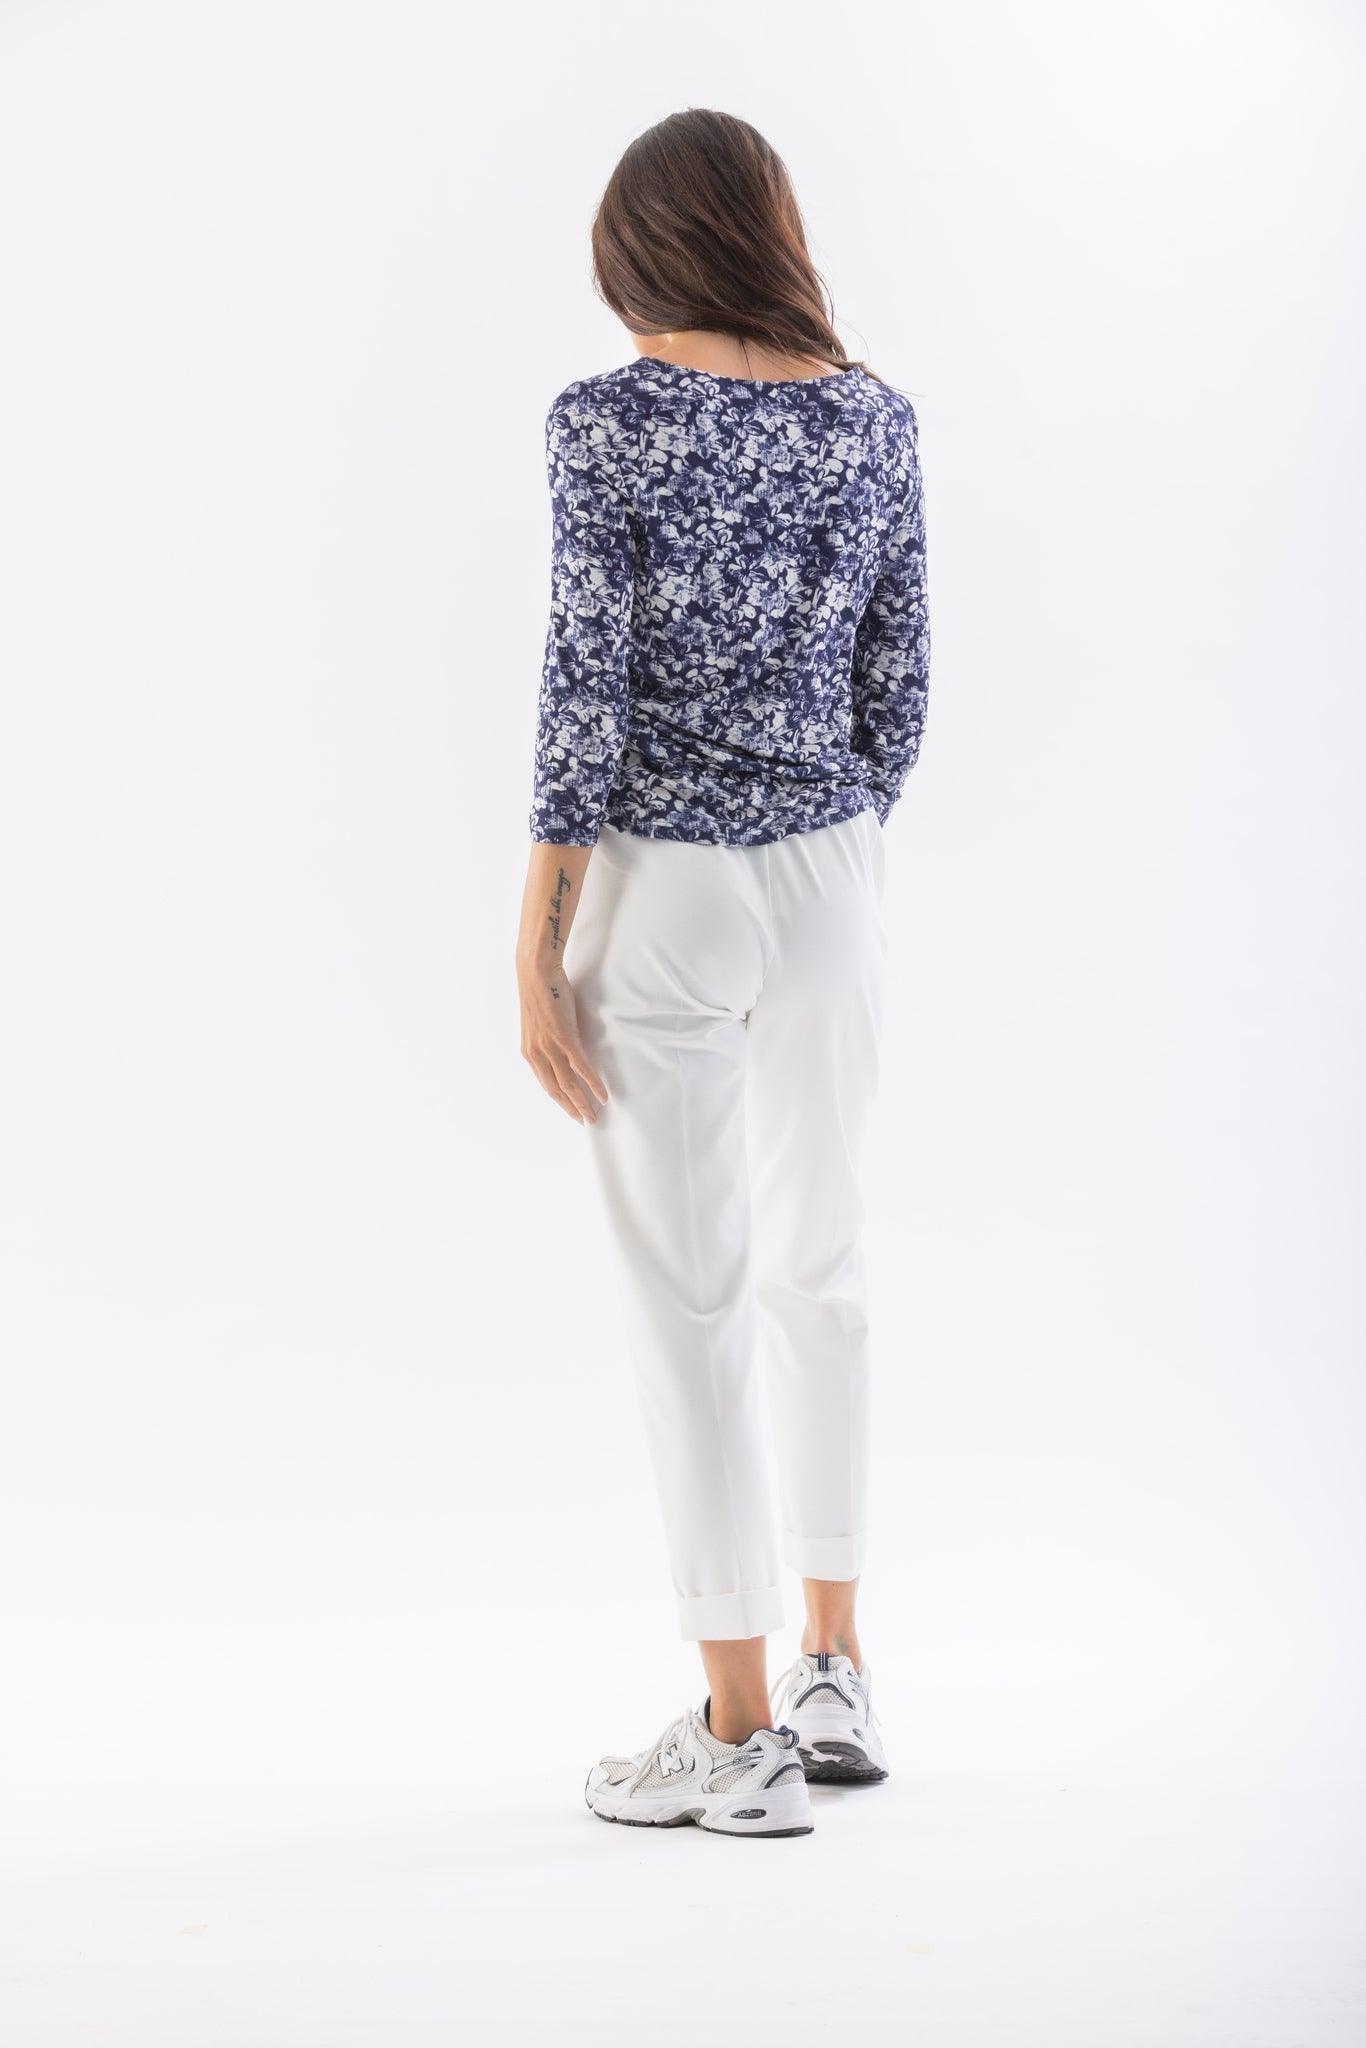 ¾ sleeve and boat neck sweater with pattern 047206